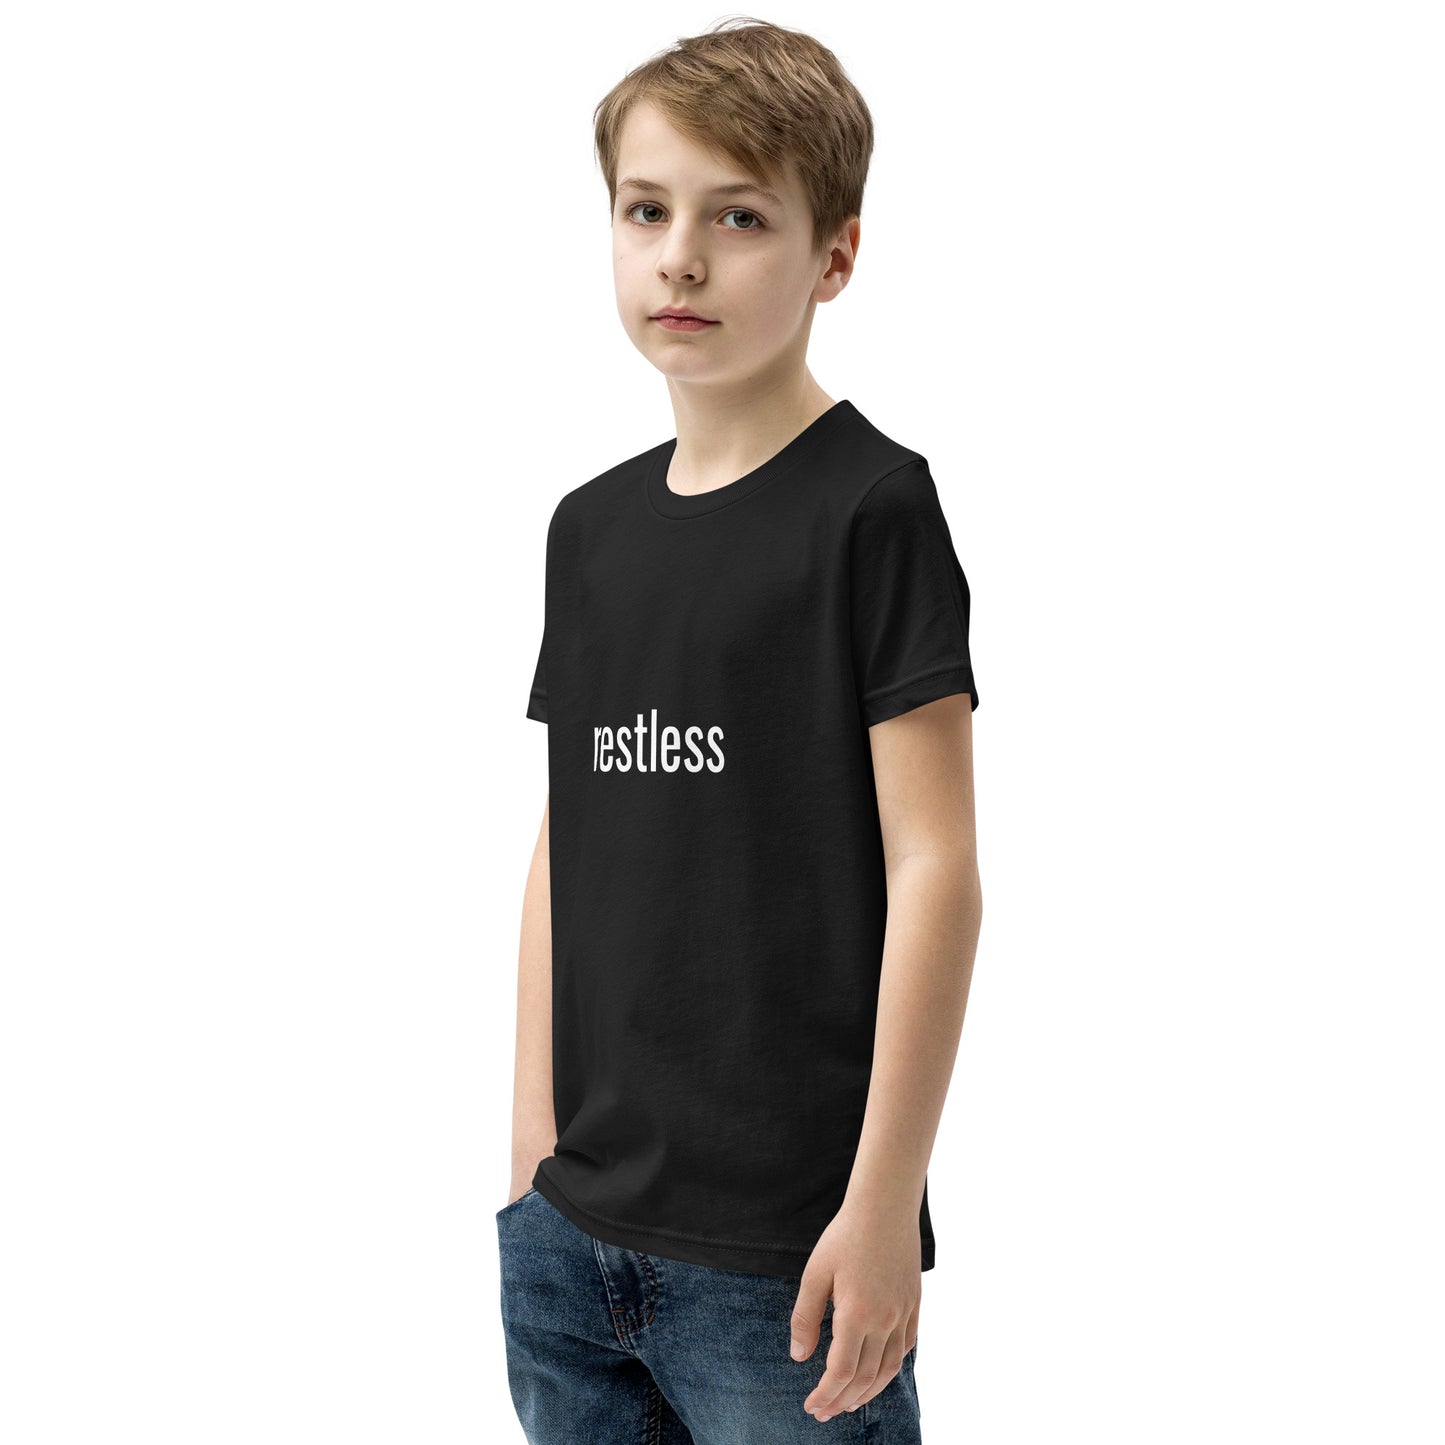 Youth “Restless” T-Shirt